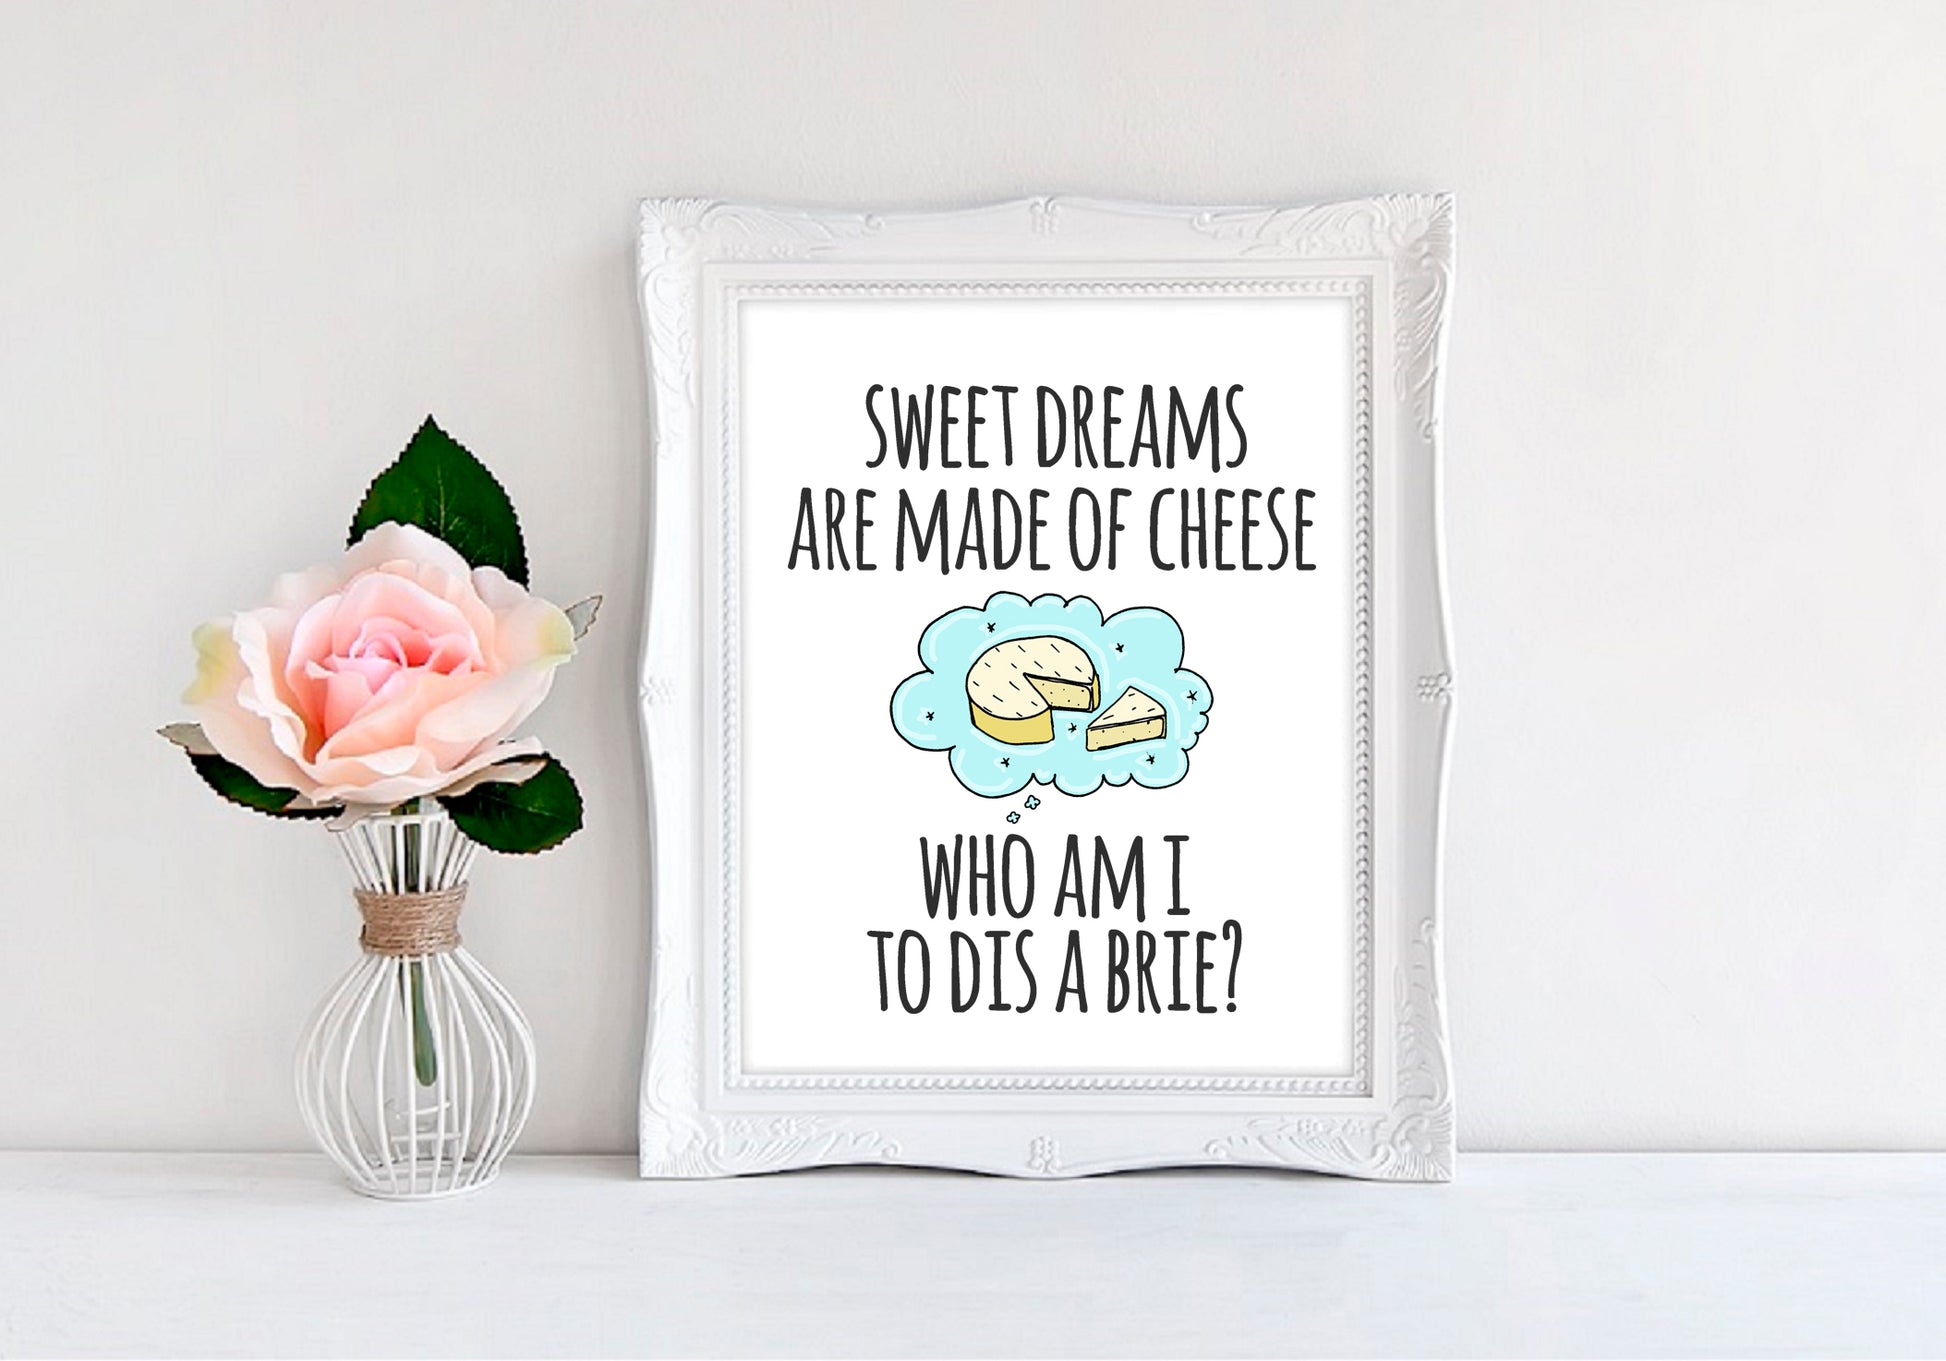 Sweet Dreams Are Made Of Cheese, Who Am I To Dis A Brie - 8"x10" Wall Print - MoonlightMakers